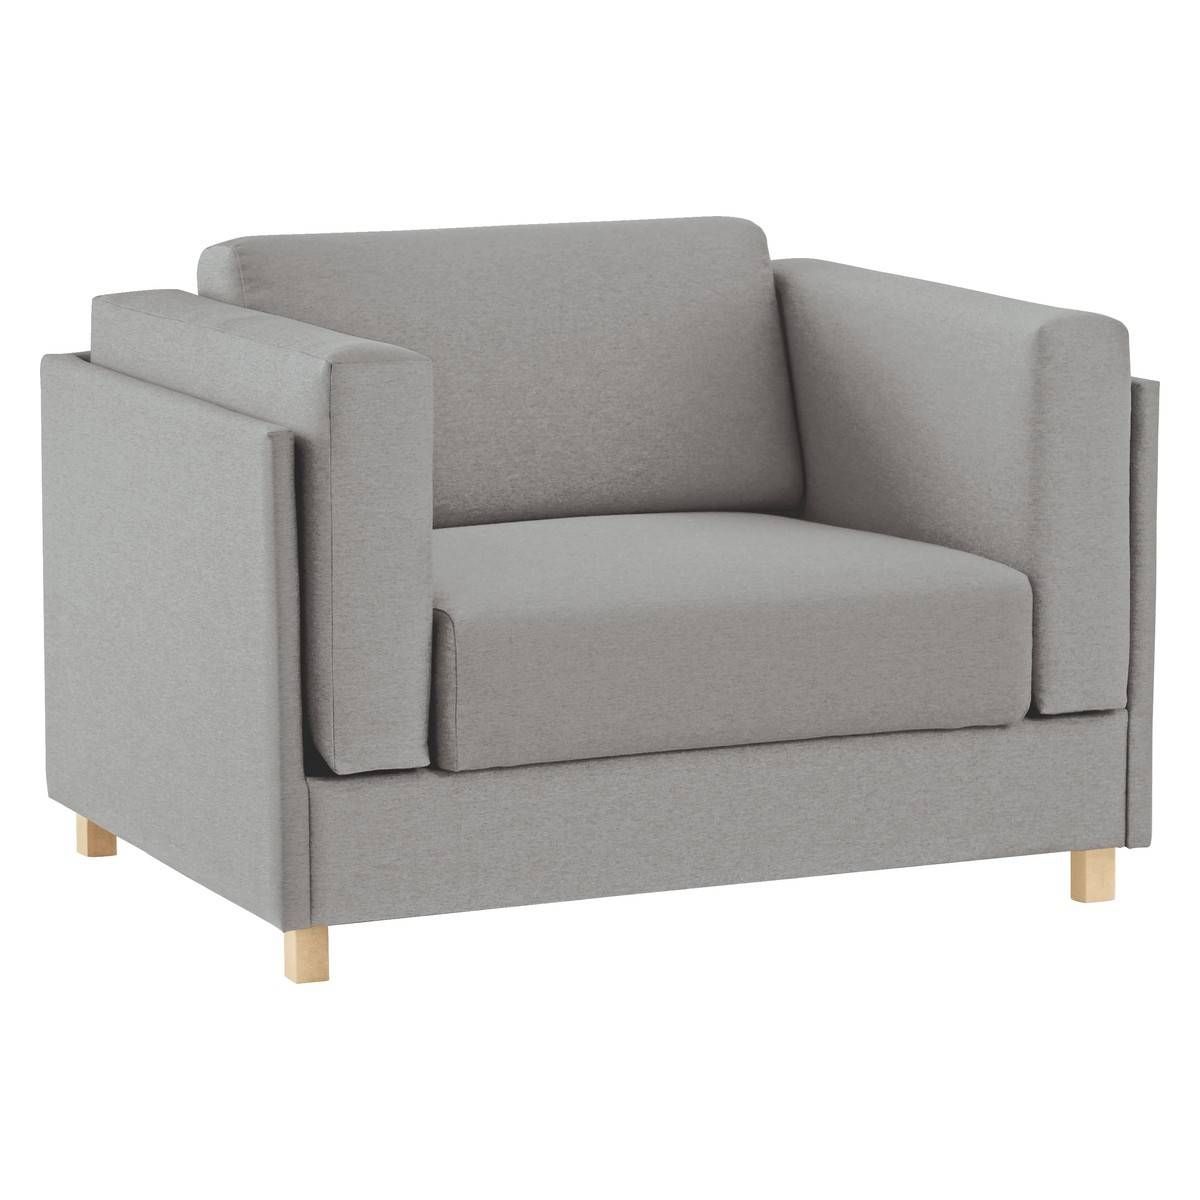 Thompson Sofa Bed – Leather Sectional Sofa Throughout Single Chair Sofa Beds (View 11 of 30)